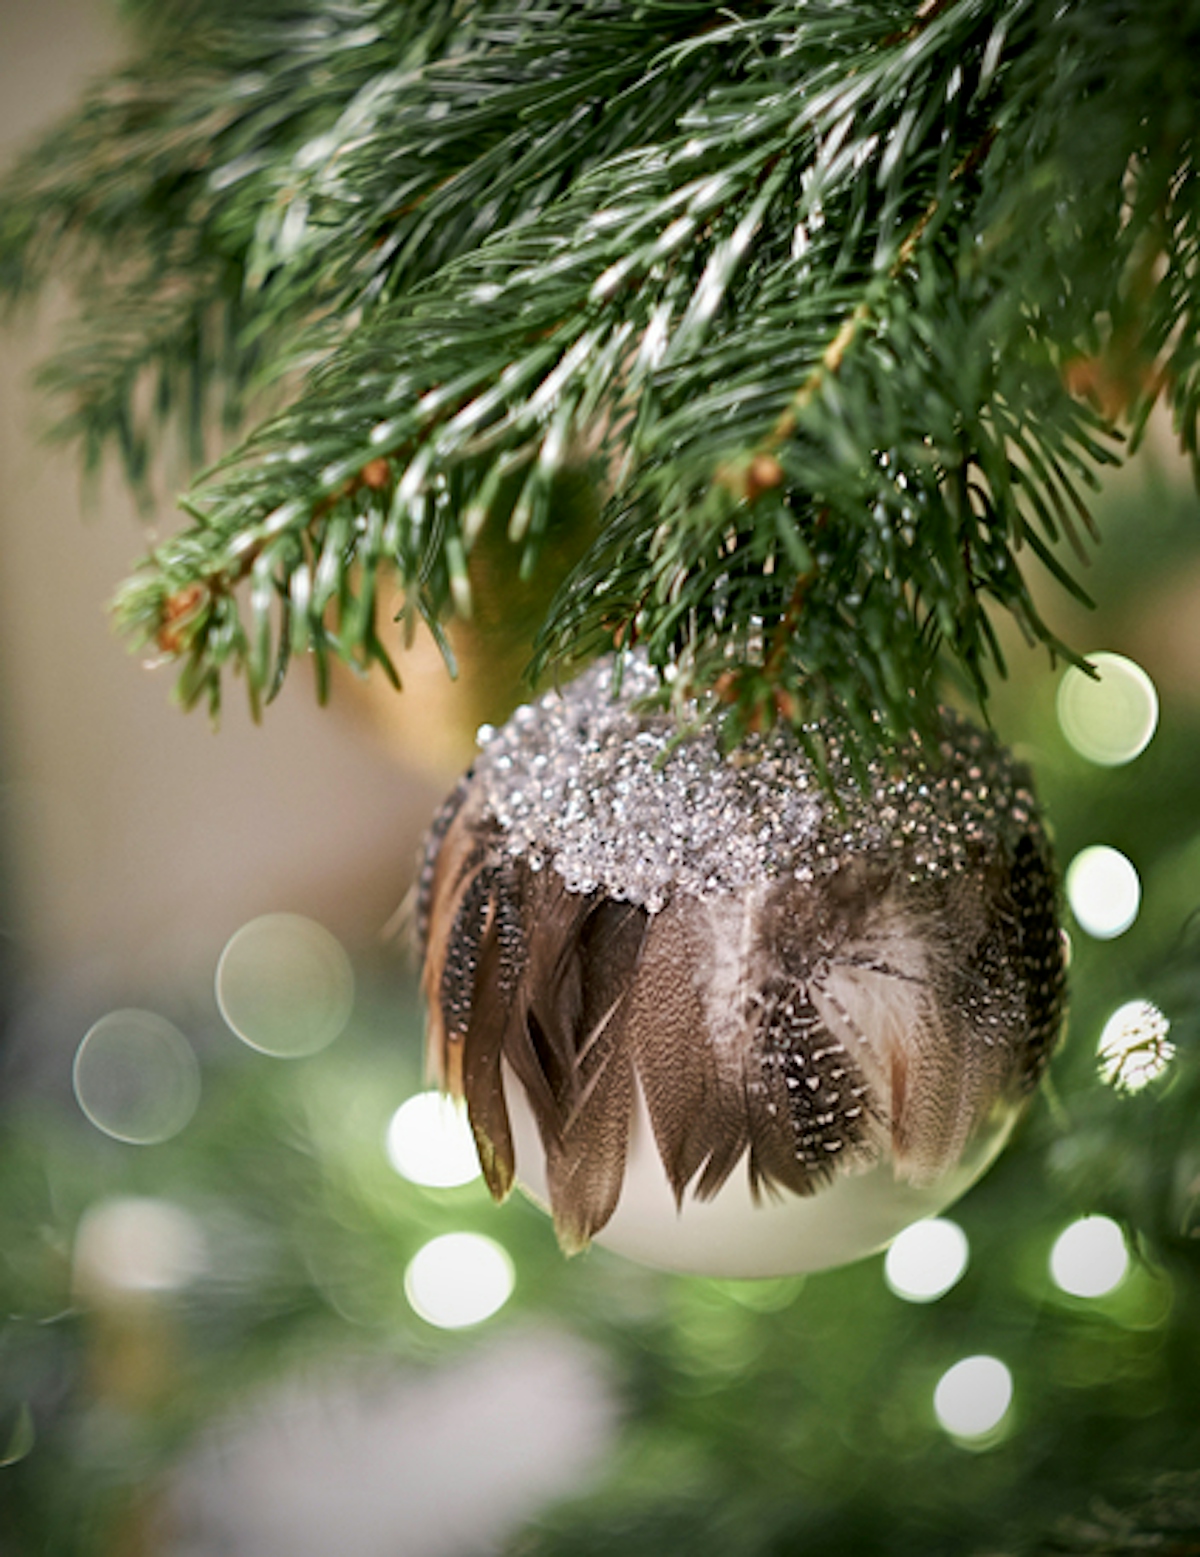 Laura Hammett Christmas Decoration - How to Decorate a Christmas Tree - LuxDeco.com